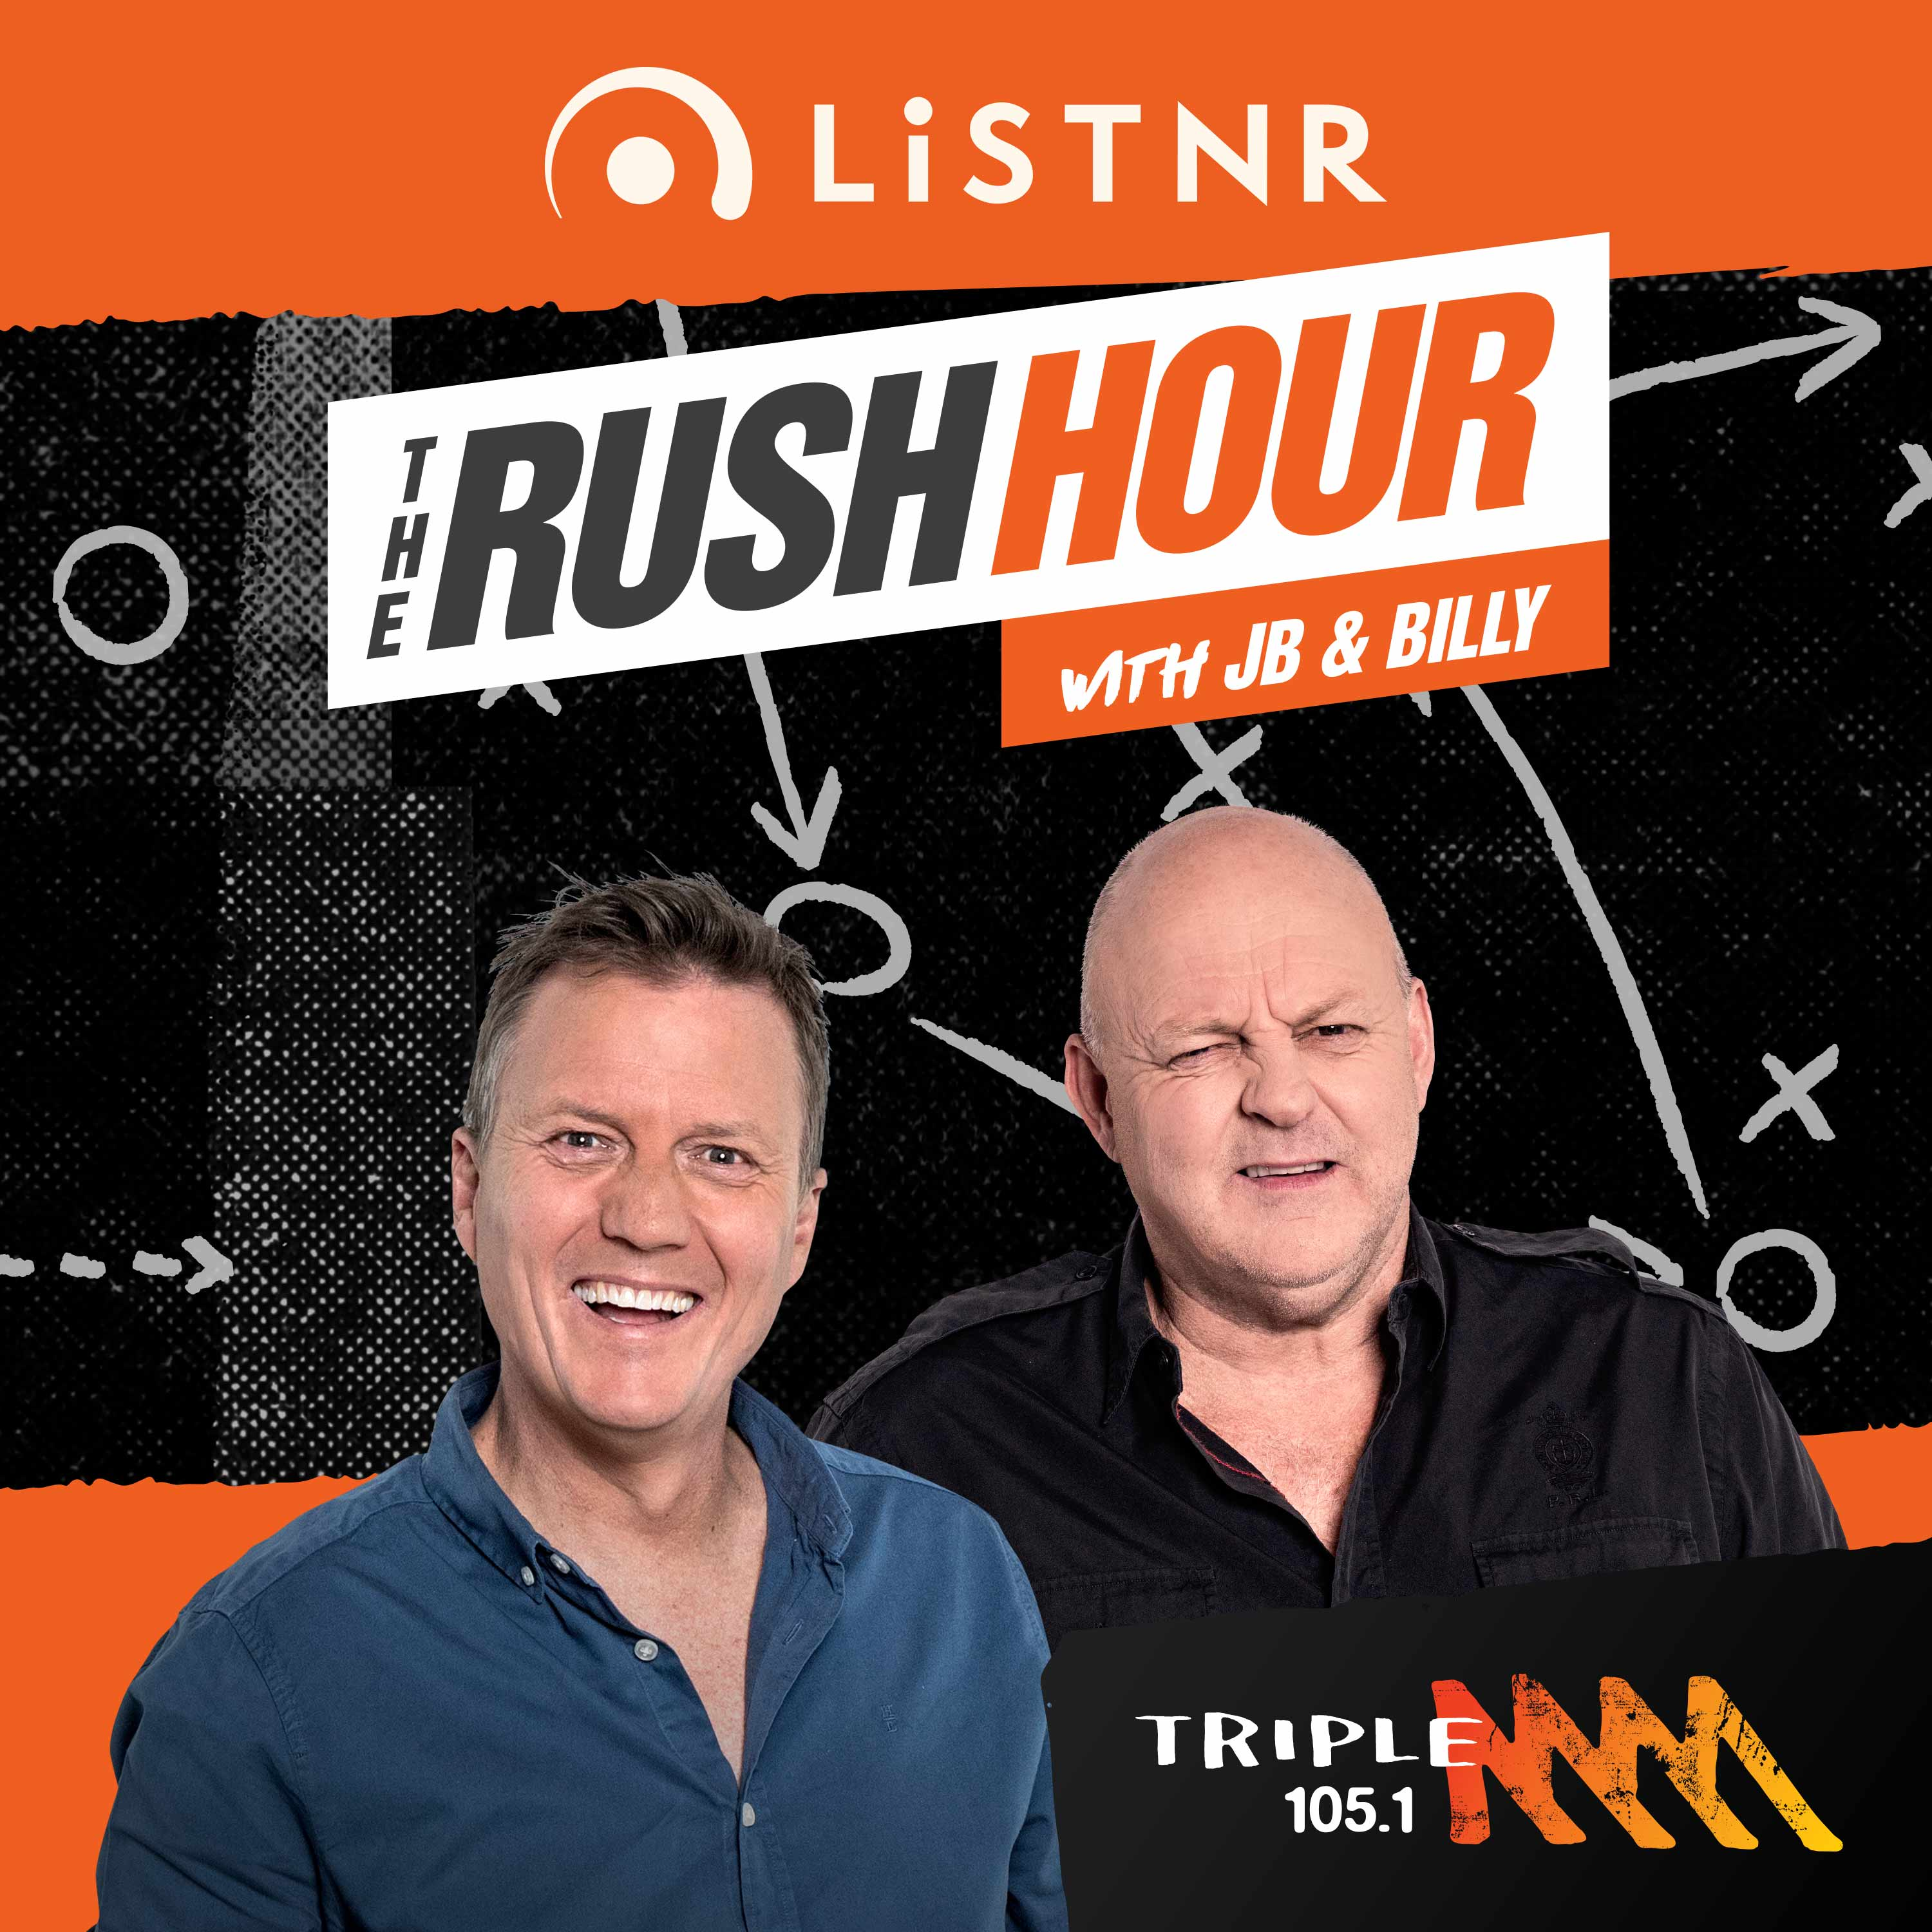 Idiot File, Scott Cam, Friday Brag Artist - The Rush Hour podcast - Friday 5th August 2022